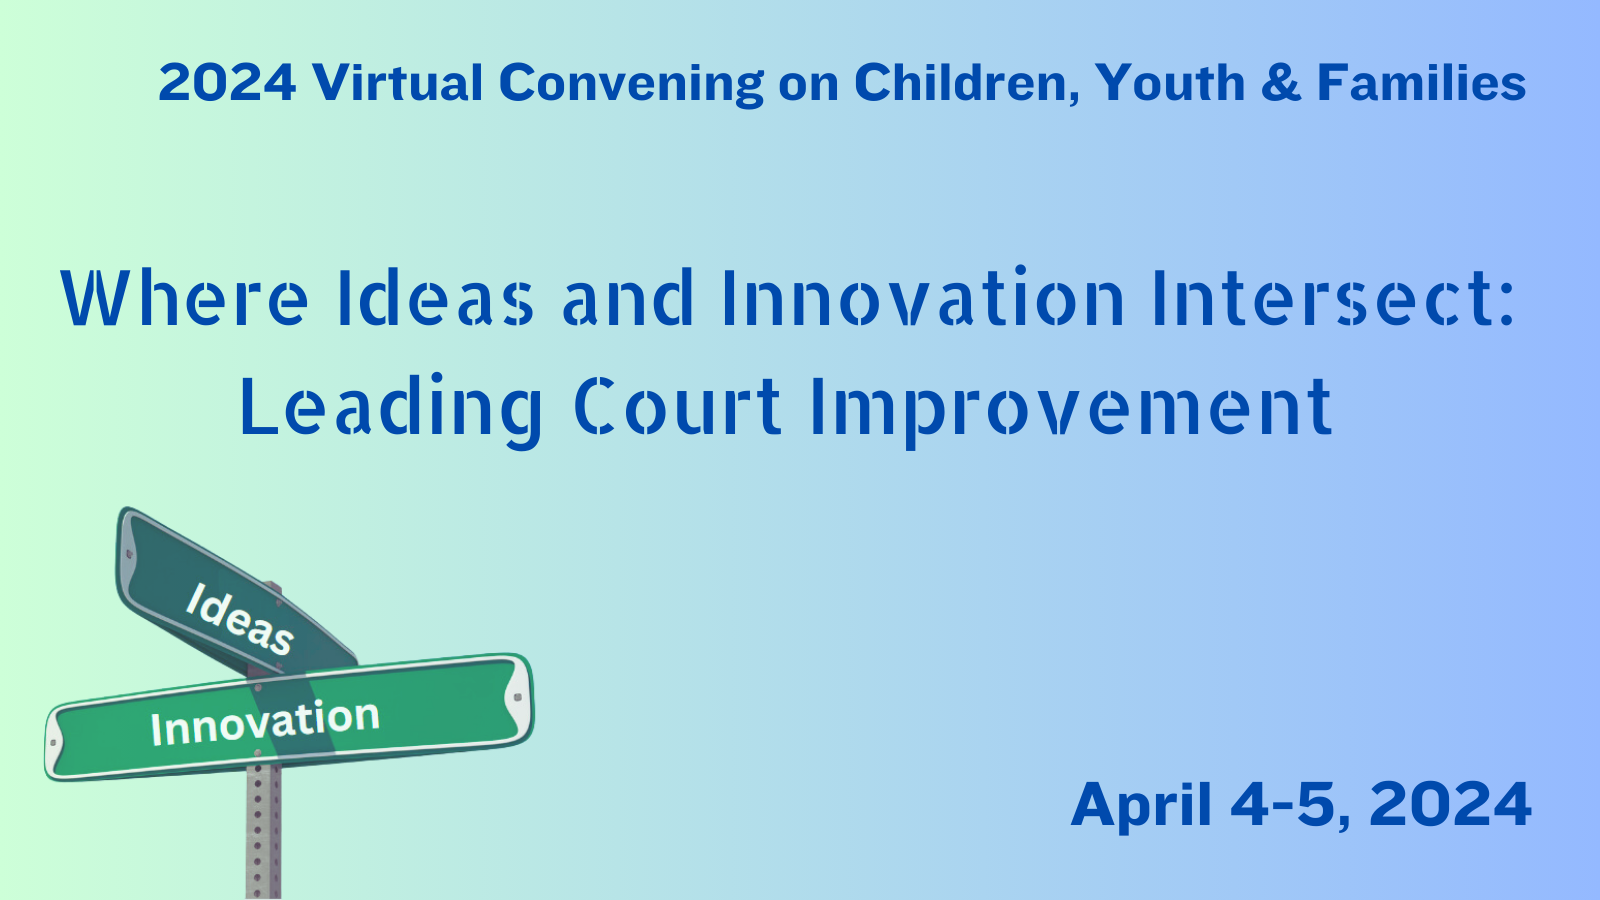 Registration open for Convening 